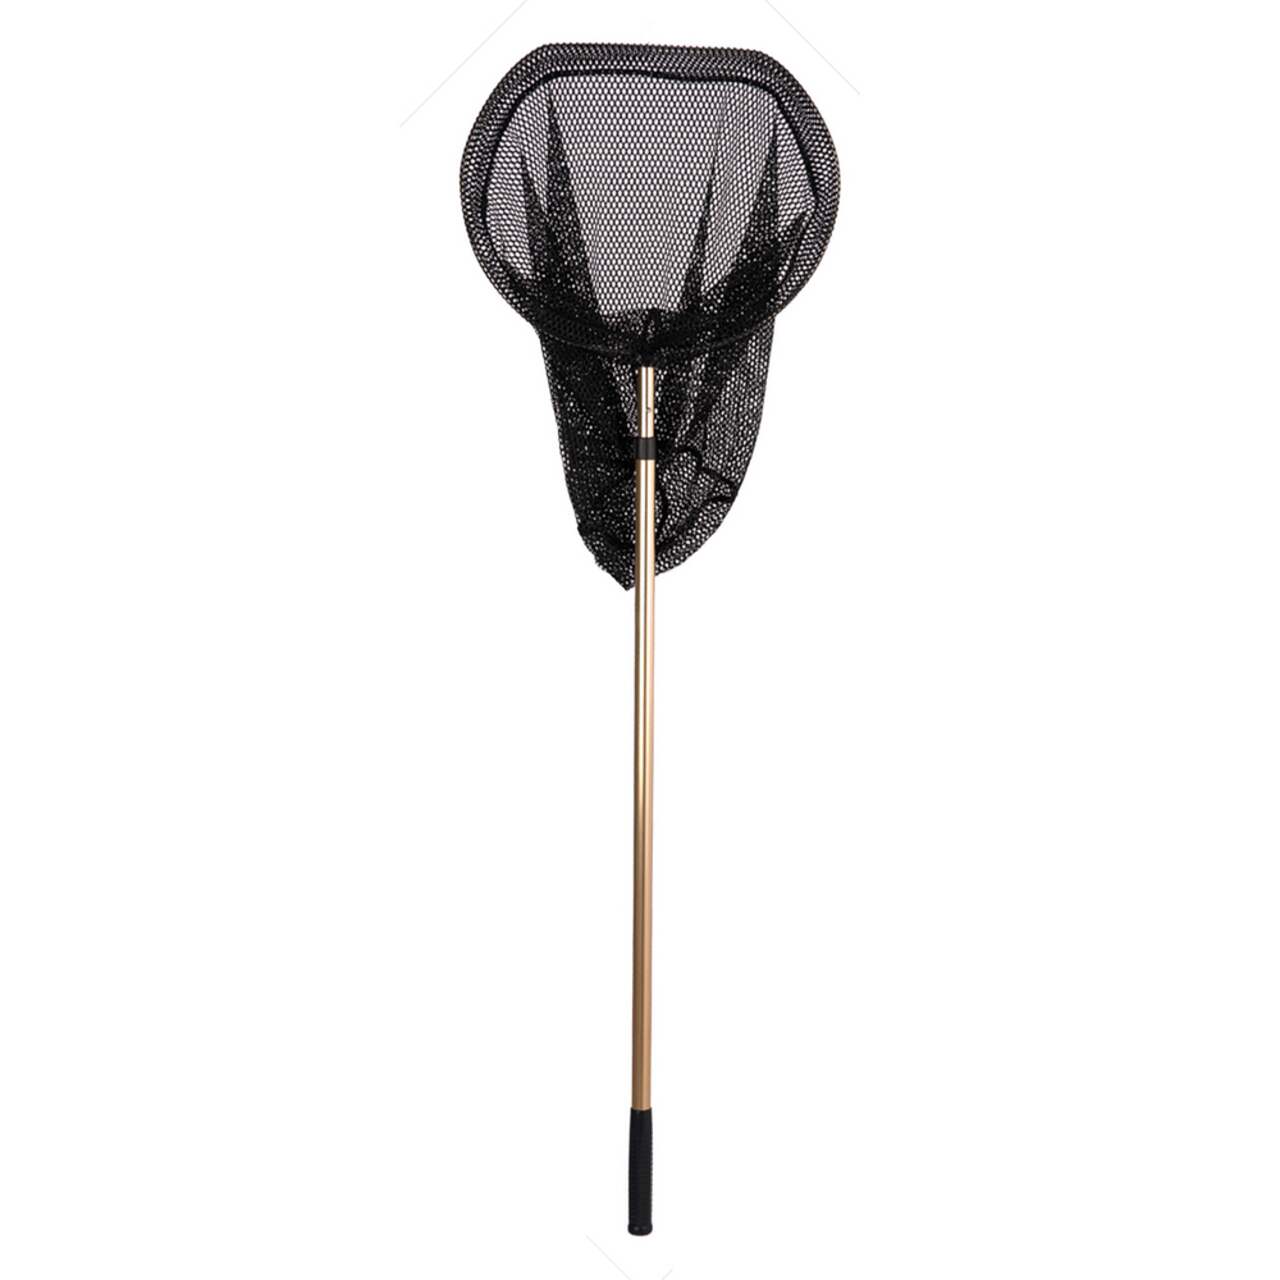 https://media-www.canadiantire.ca/product/seasonal-gardening/backyard-living/outdoor-living-accessories/0590712/pond-boss-skimmer-fish-net-2f4850fb-d654-4f64-93a7-e0724d4919aa.png?imdensity=1&imwidth=1244&impolicy=mZoom